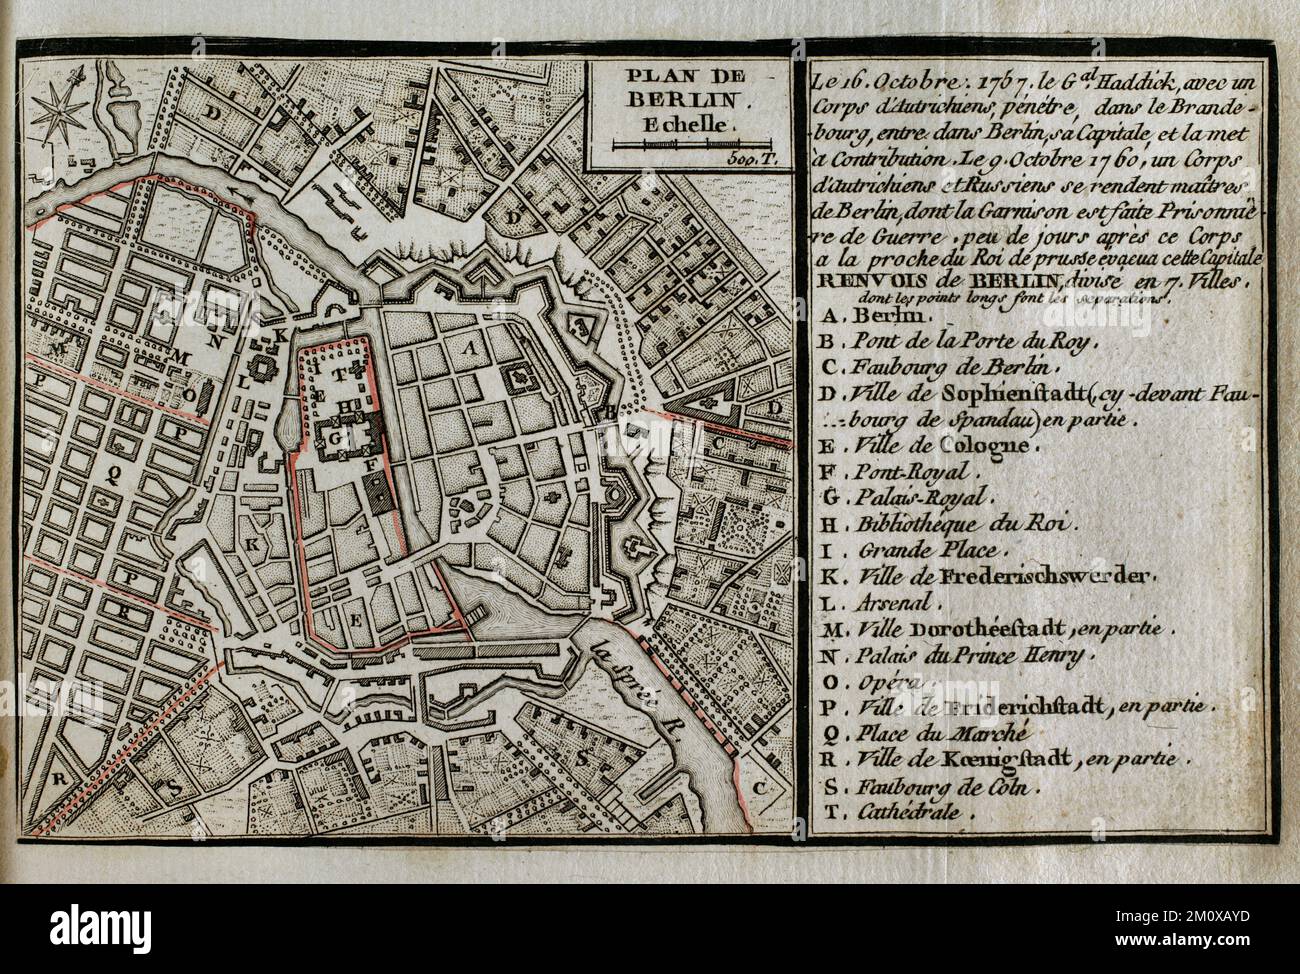 Seven Years War (1756-1763). Third Silesian War. Map of Berlin, 1760. Raid on Berlin. On 9 October 1760, Austrian and Russian troops occupied the Prussian capital of Berlin for a few days. After sacking the city and being informed that the Prussians were sending reinforcements to Berlin, they retreated. Published in 1765 by the cartographer Jean de Beaurain (1696-1771) as an illustration of his Great Map of Germany, with the events that took place during the Seven Years War. Etching and engraving. French edition, 1765. Military Historical Library of Barcelona (Biblioteca Histórico Militar de B Stock Photo